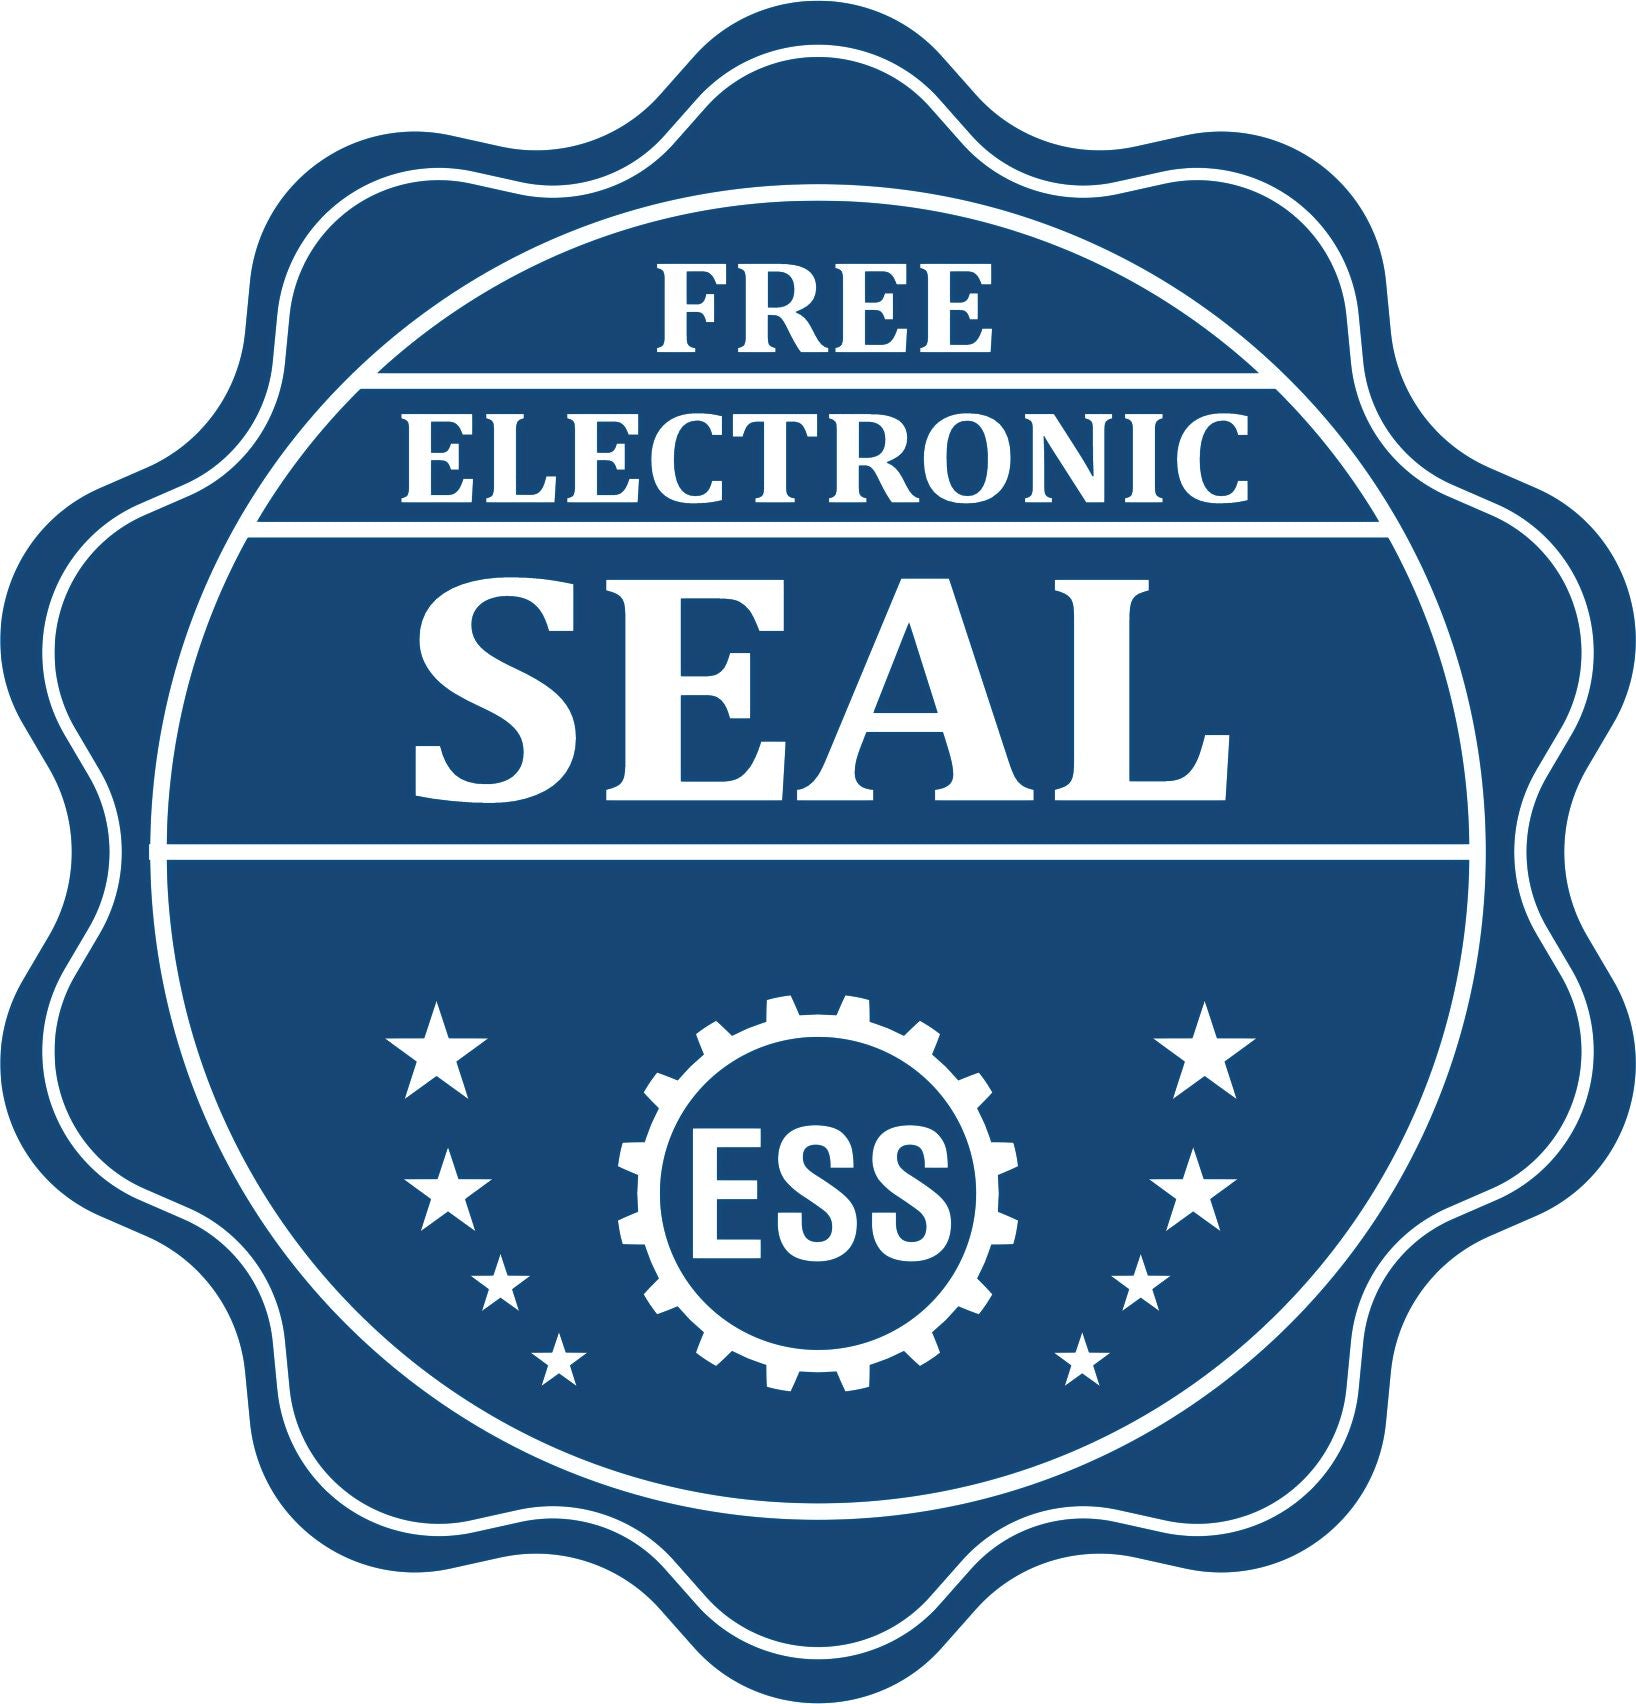 A badge showing a free electronic seal for the Slim Pre-Inked Kentucky Landscape Architect Seal Stamp with stars and the ESS gear on the emblem.